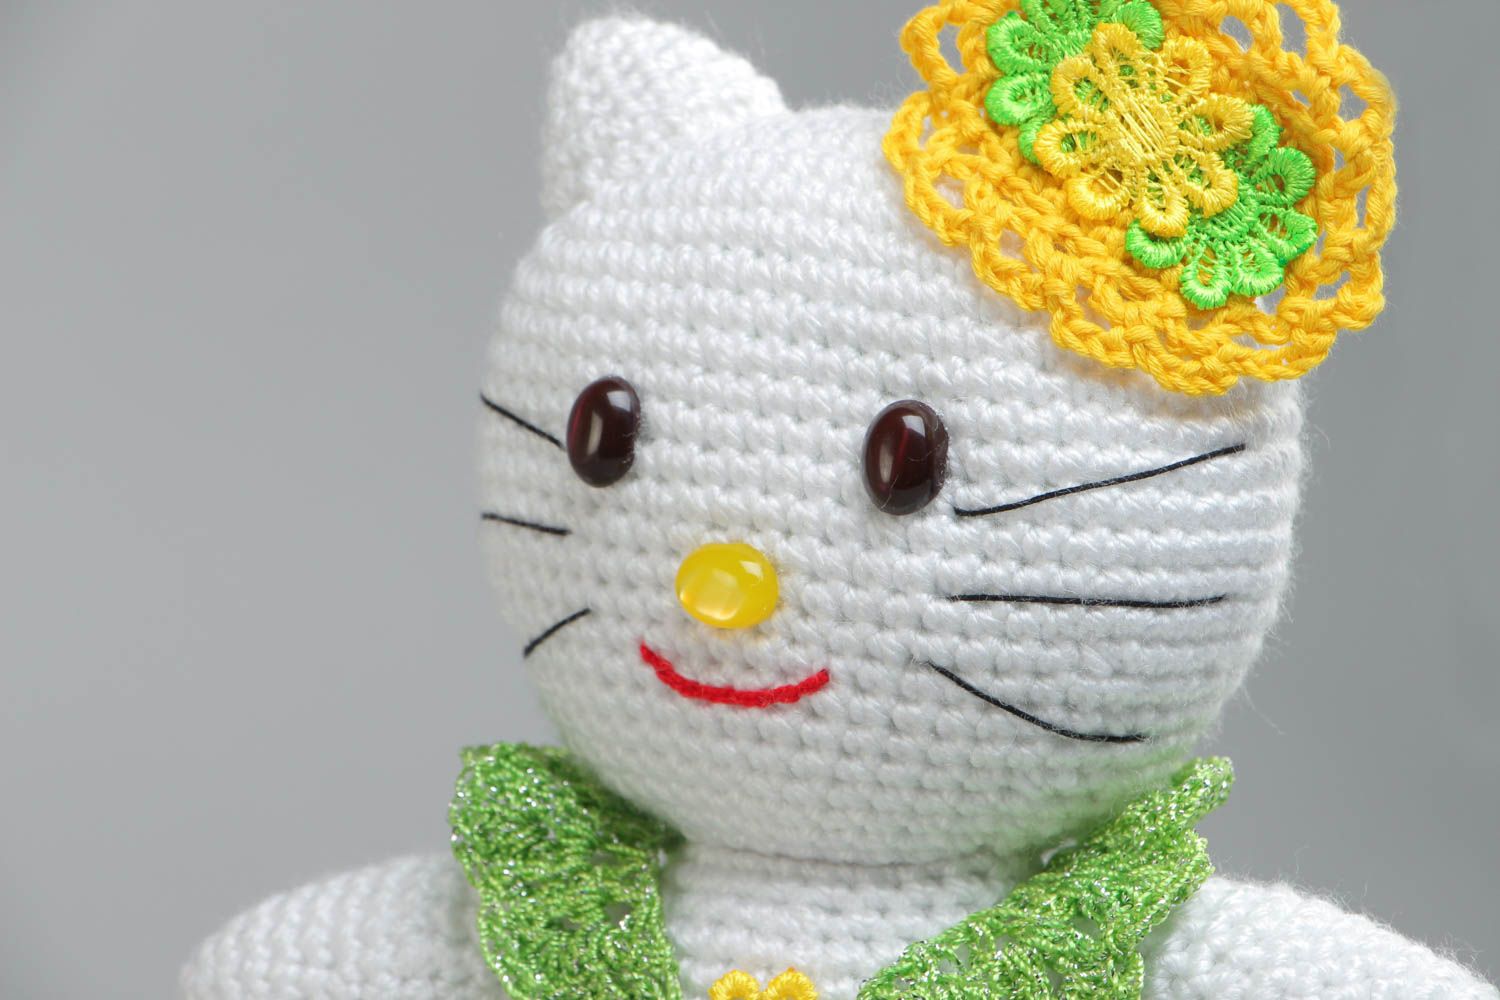 Soft handmade decorative crocheted toy cat in a green dress made of acrylic threads photo 3